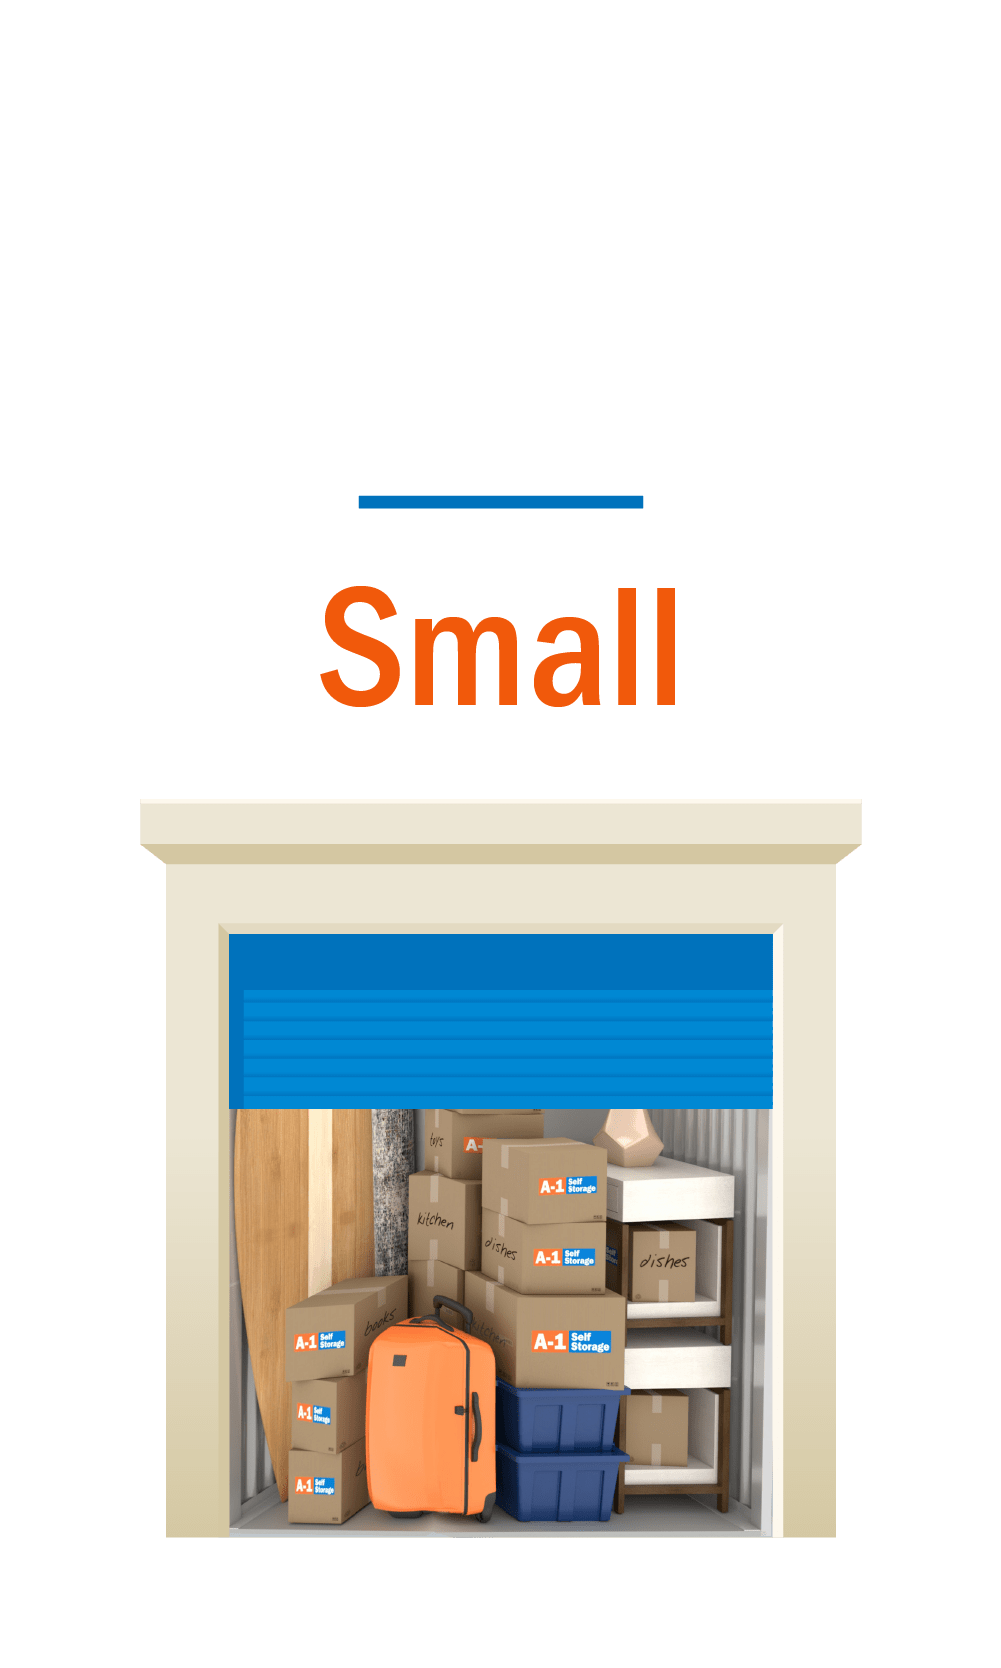 Small storage unit graphic with door open